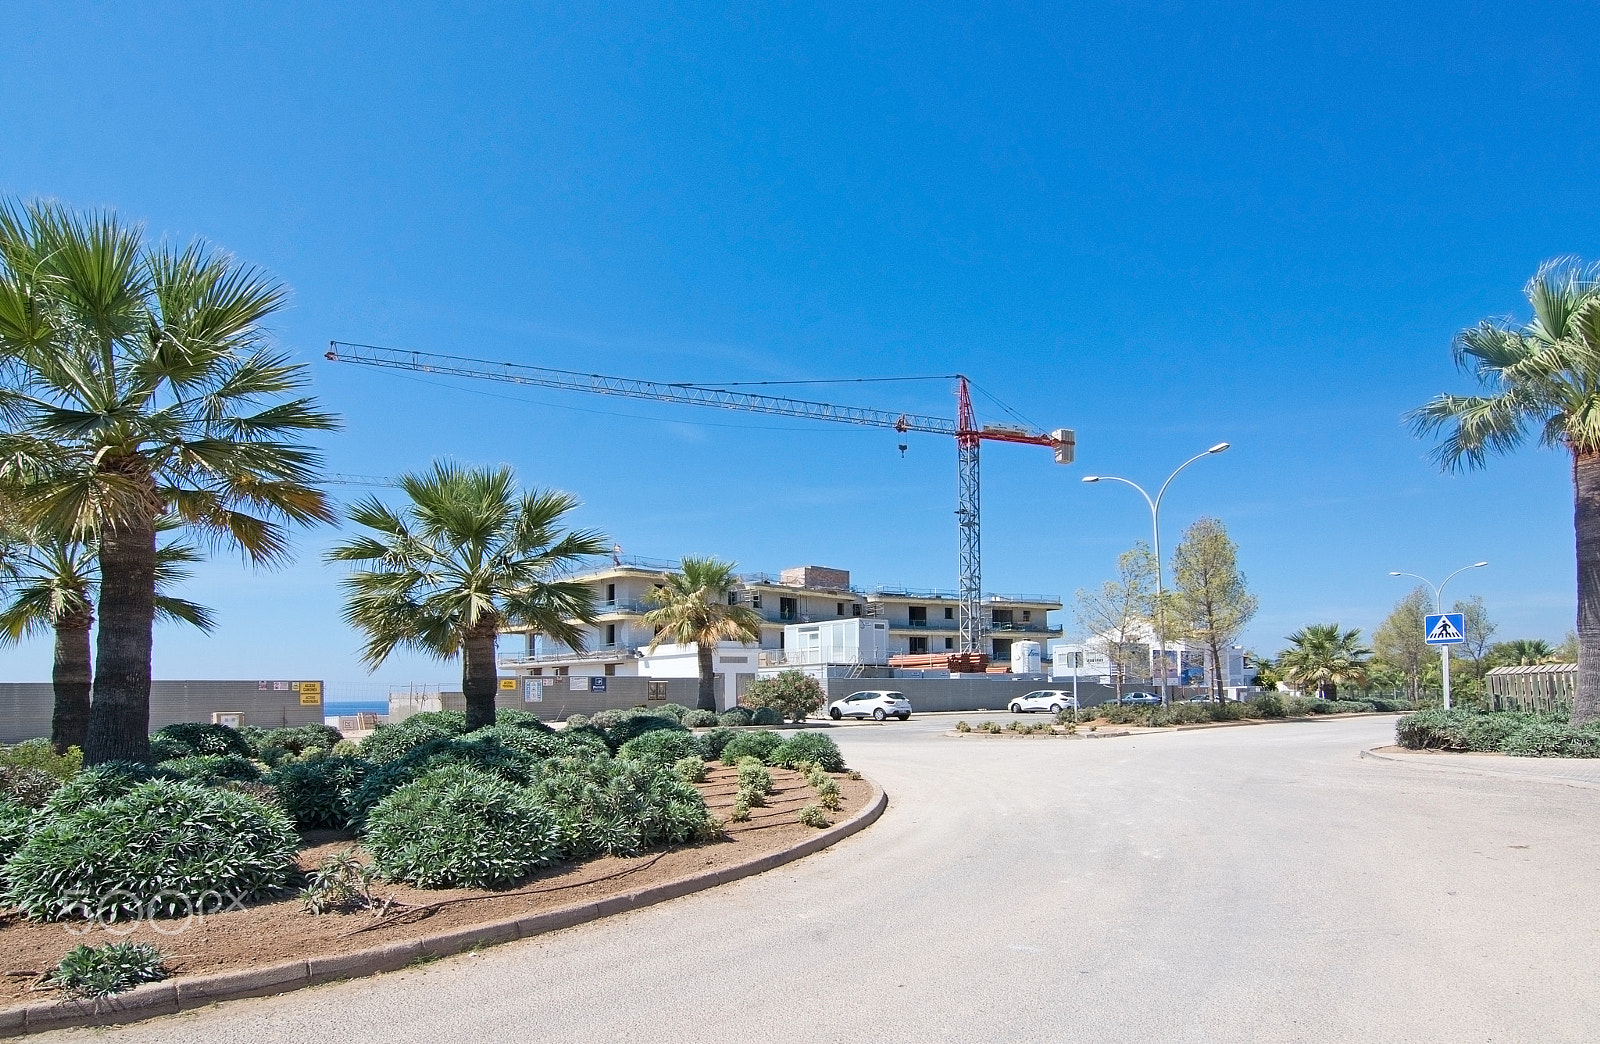 Nikon D7100 + Sigma 18-200mm F3.5-6.3 DC sample photo. Construction site with ocean view photography